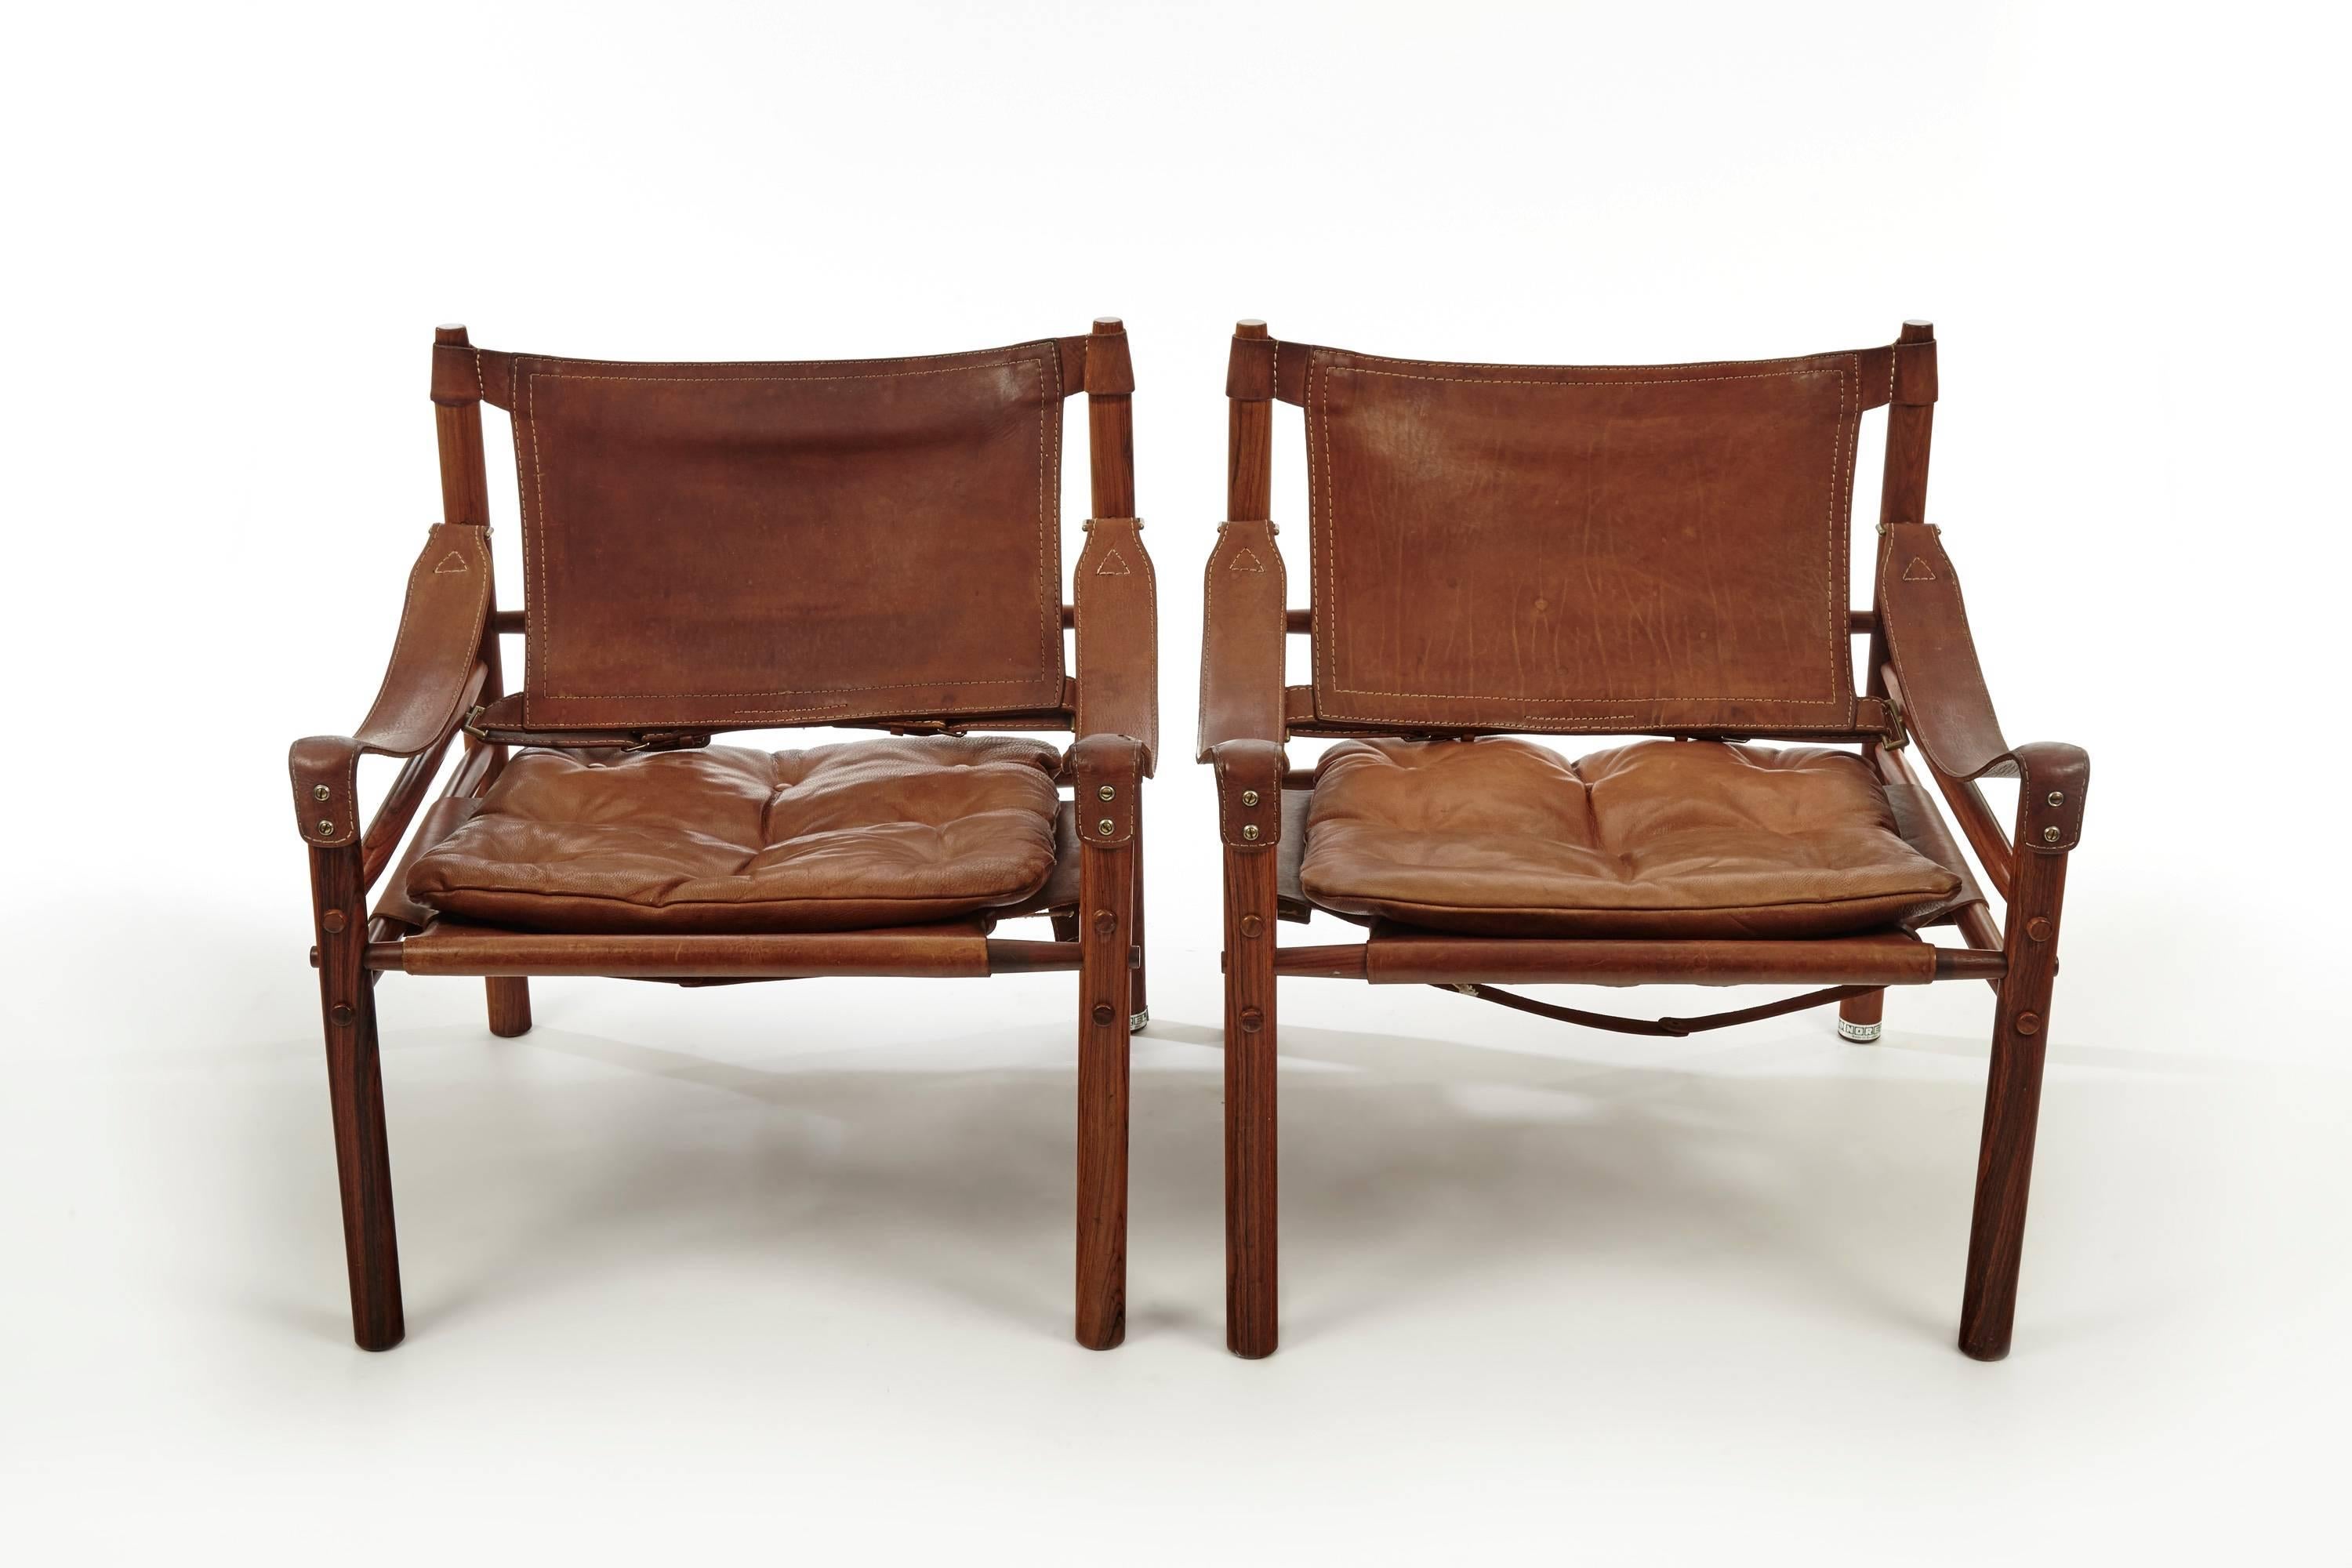 Scandinavian Modern Pair of Rosewood Arne Norell Sirocco Safari Chairs, Aneby Mobler, Sweden, 1960s